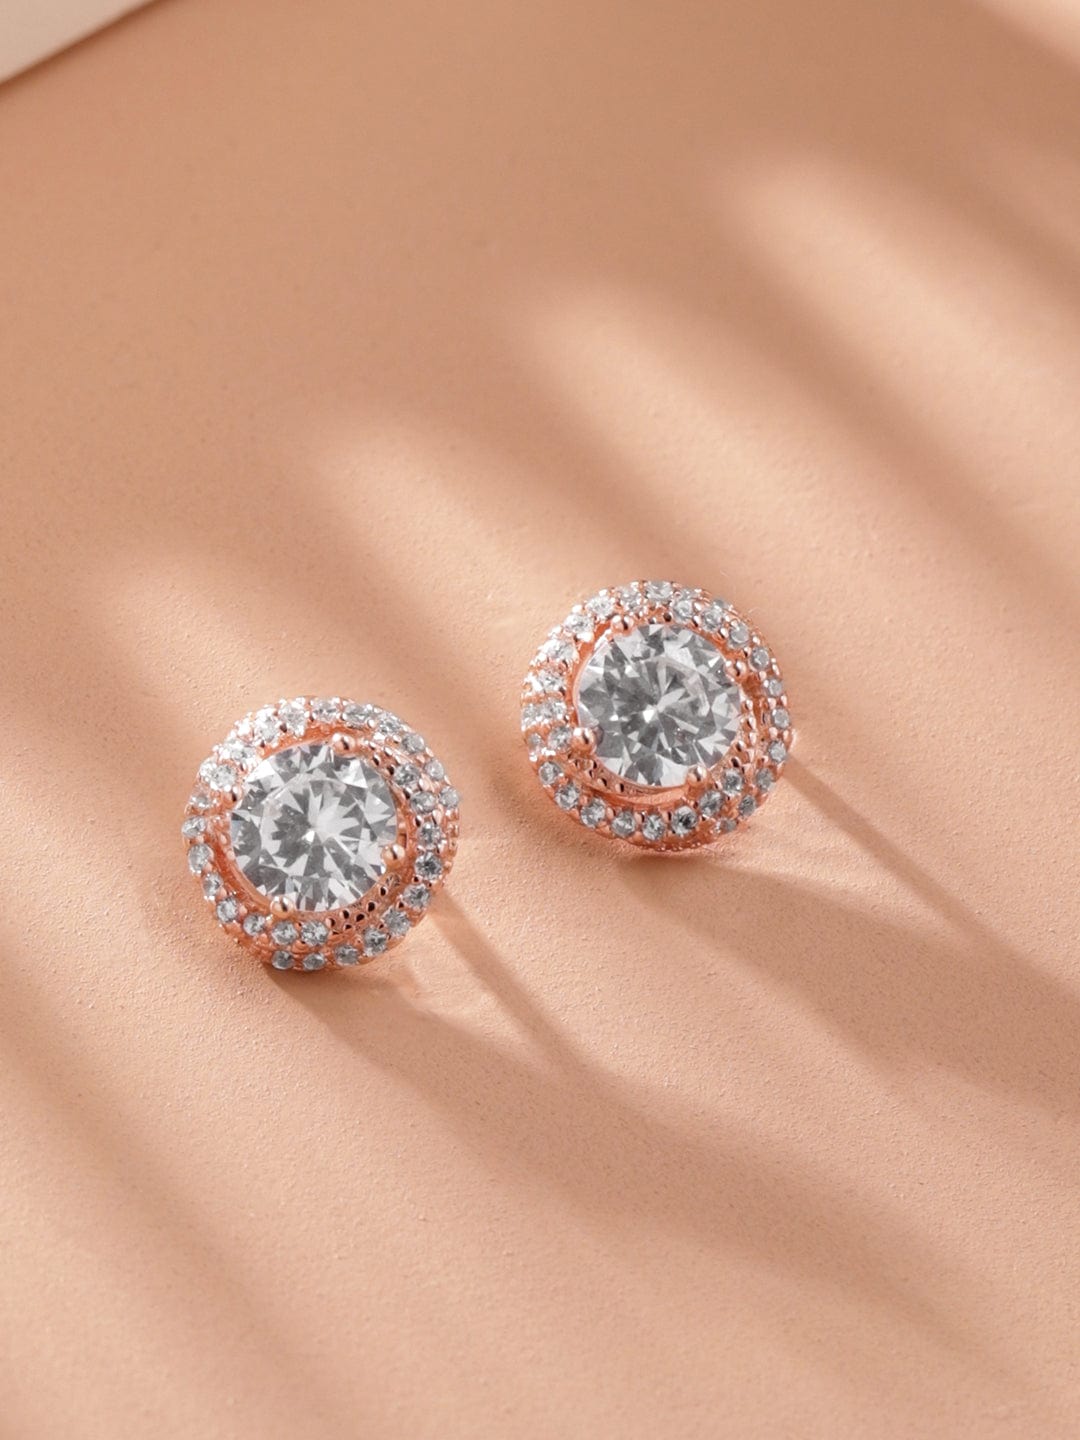 Luxurious Allure 925 Silver Stud Earrings with a Gold Tone Earrings